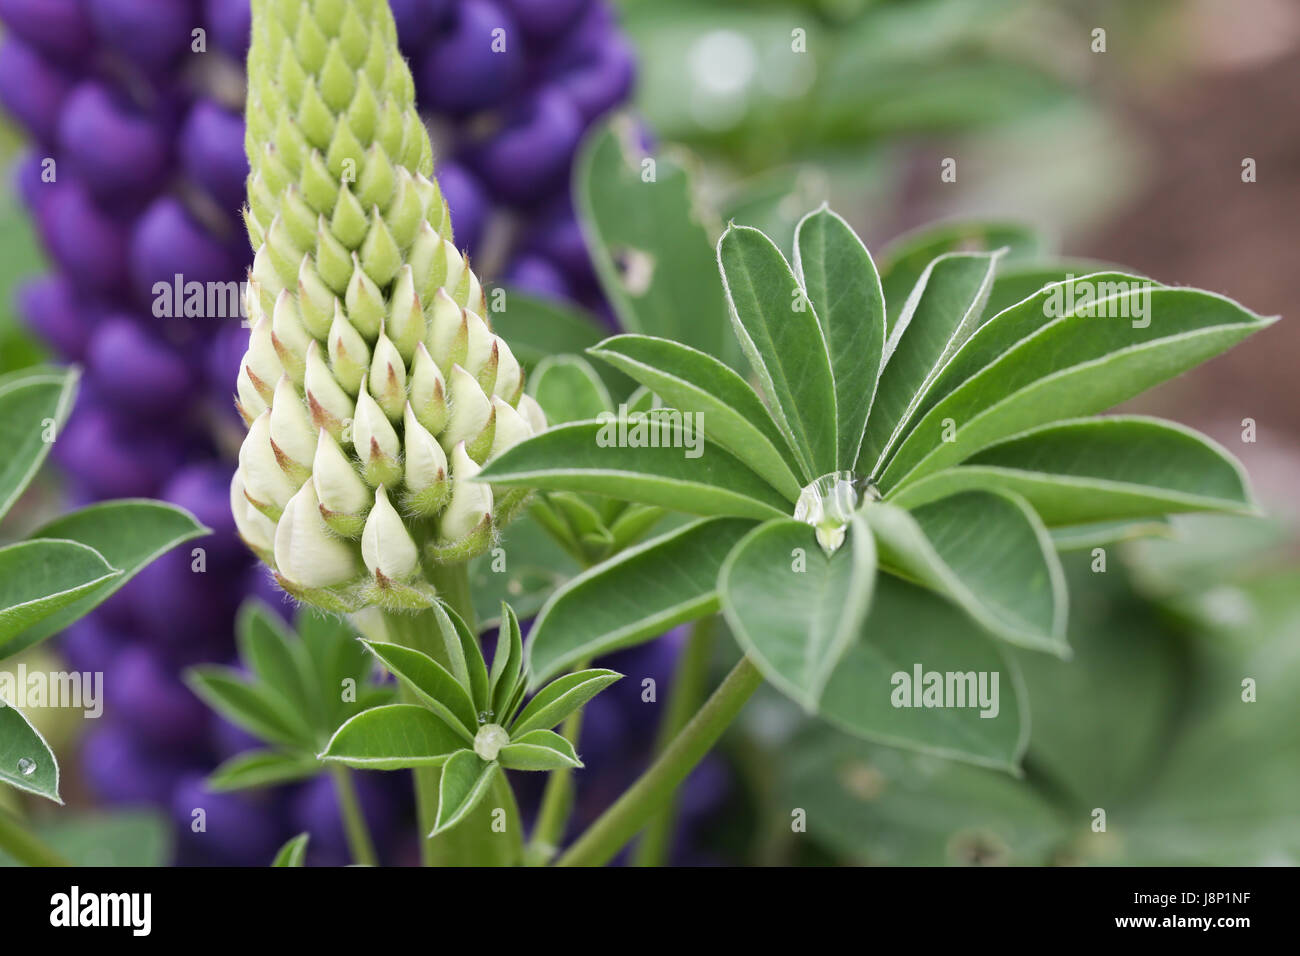 Buds, mature flowers and foliage of the pollinator friendly Lupinus (Lupin) 'Persian Slipper' plant in a British garden, shortly after a rain shower. Stock Photo